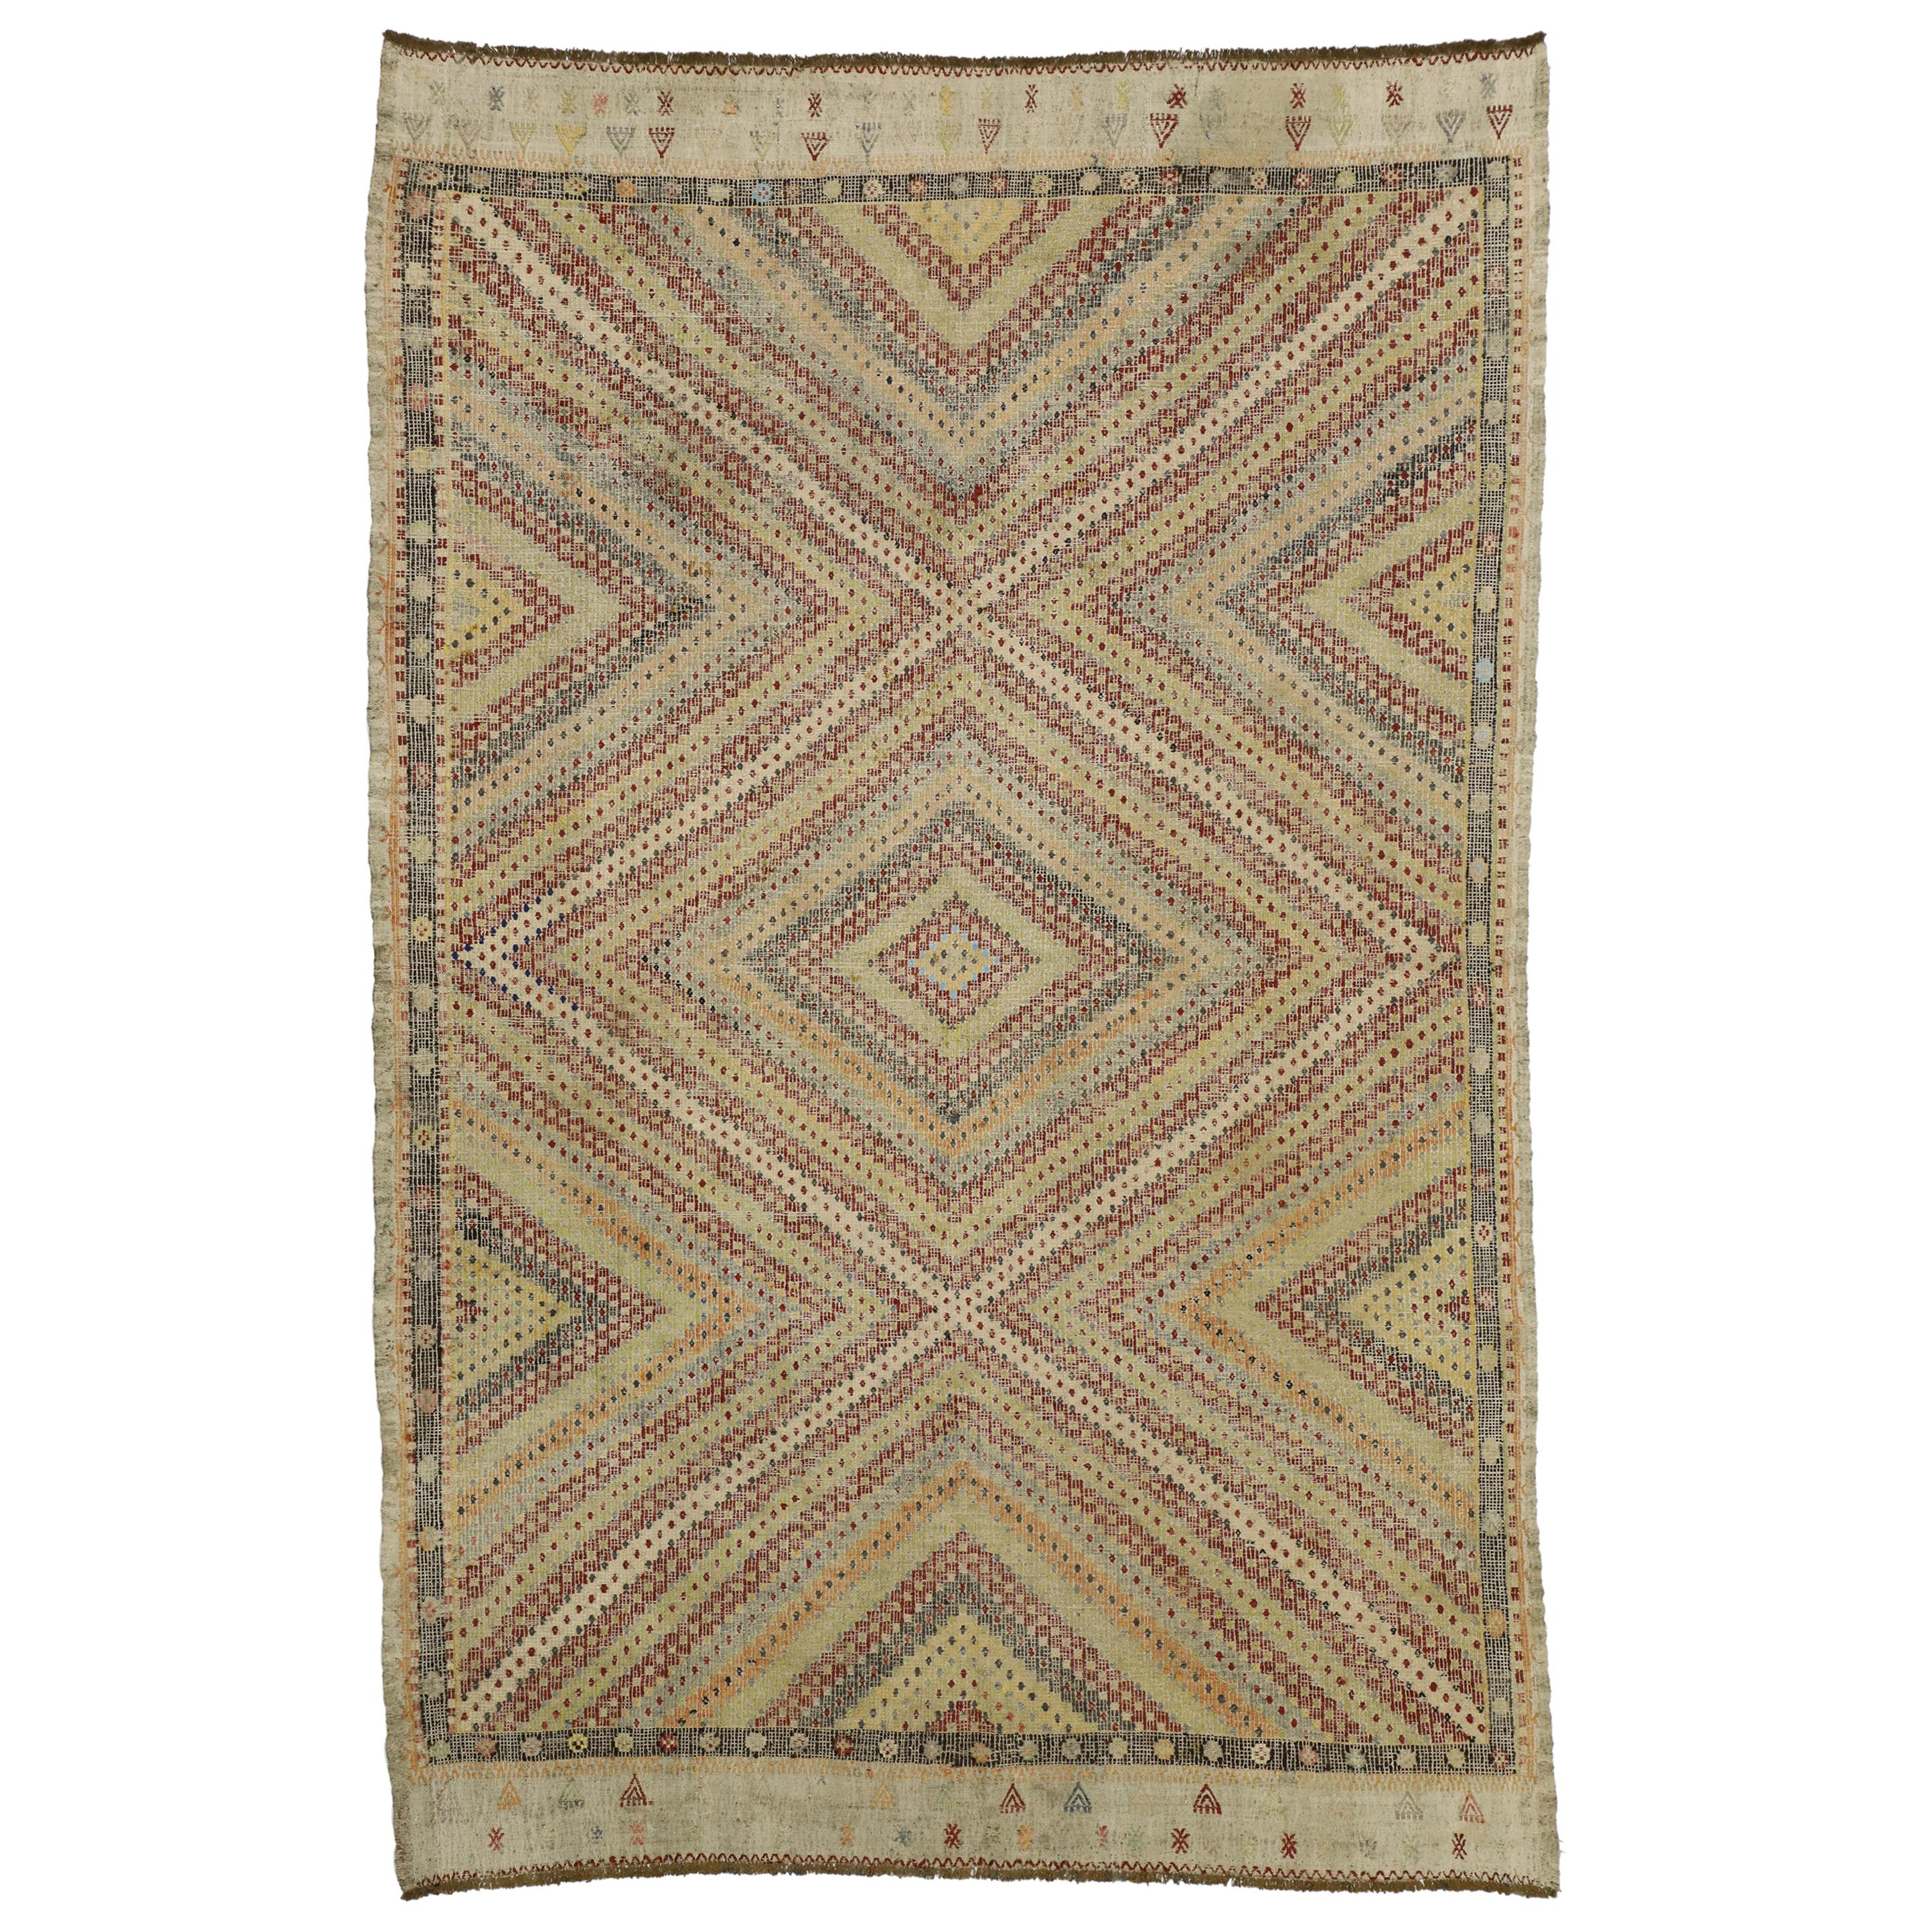 Distressed Vintage Turkish Kilim Rug with Southern Living British Colonial Style